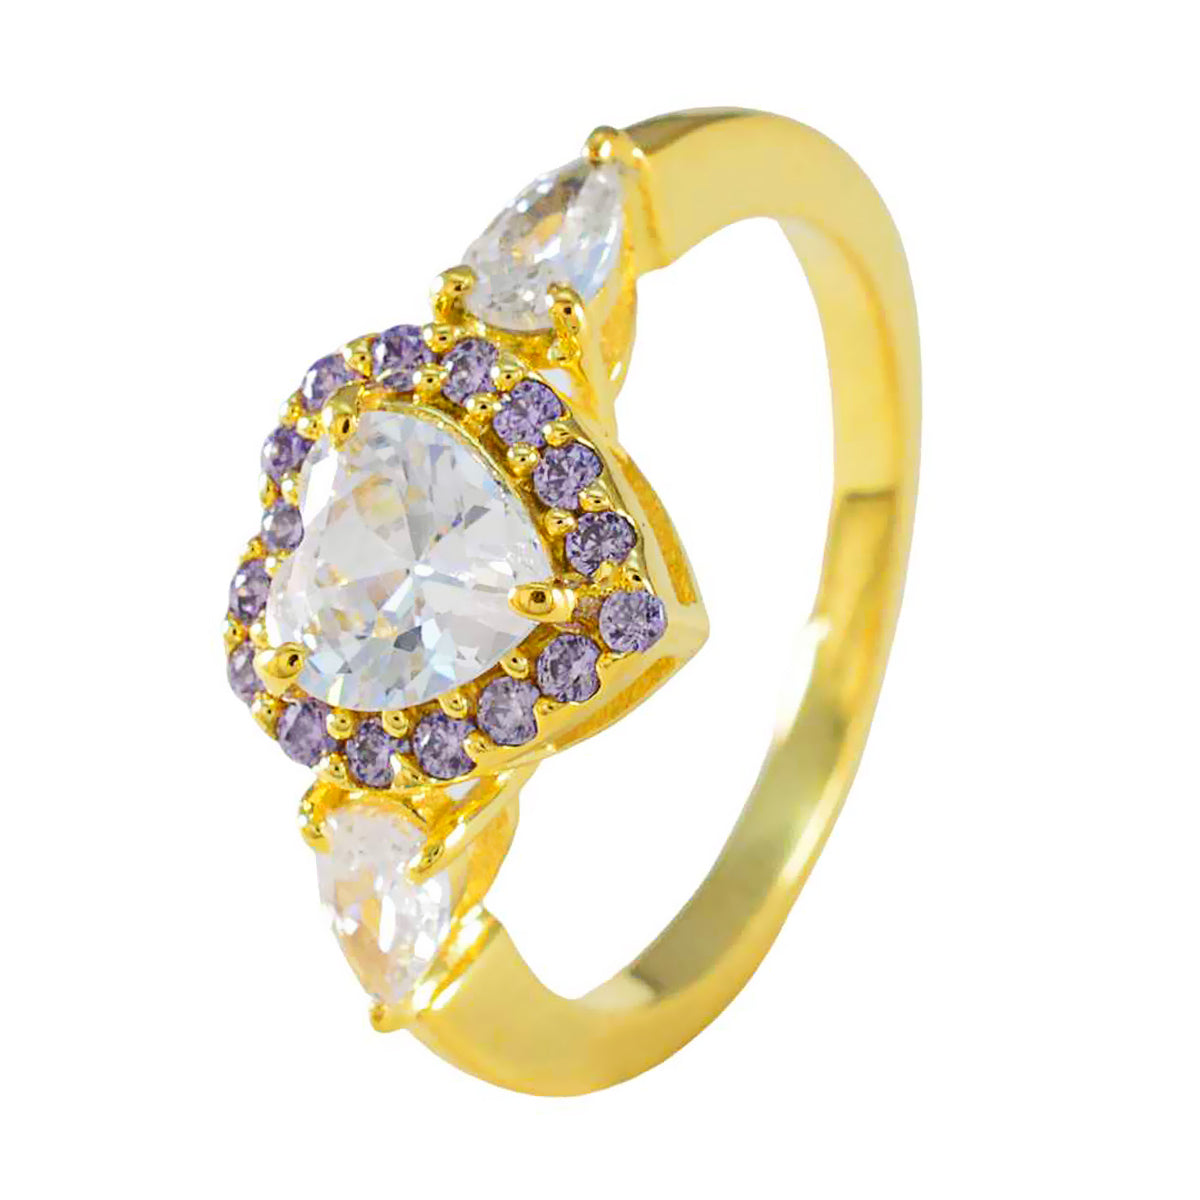 Riyo Dazzling Silver Ring With Yellow Gold Plating Amethyst Stone Heart Shape Prong Setting Jewelry New Year Ring